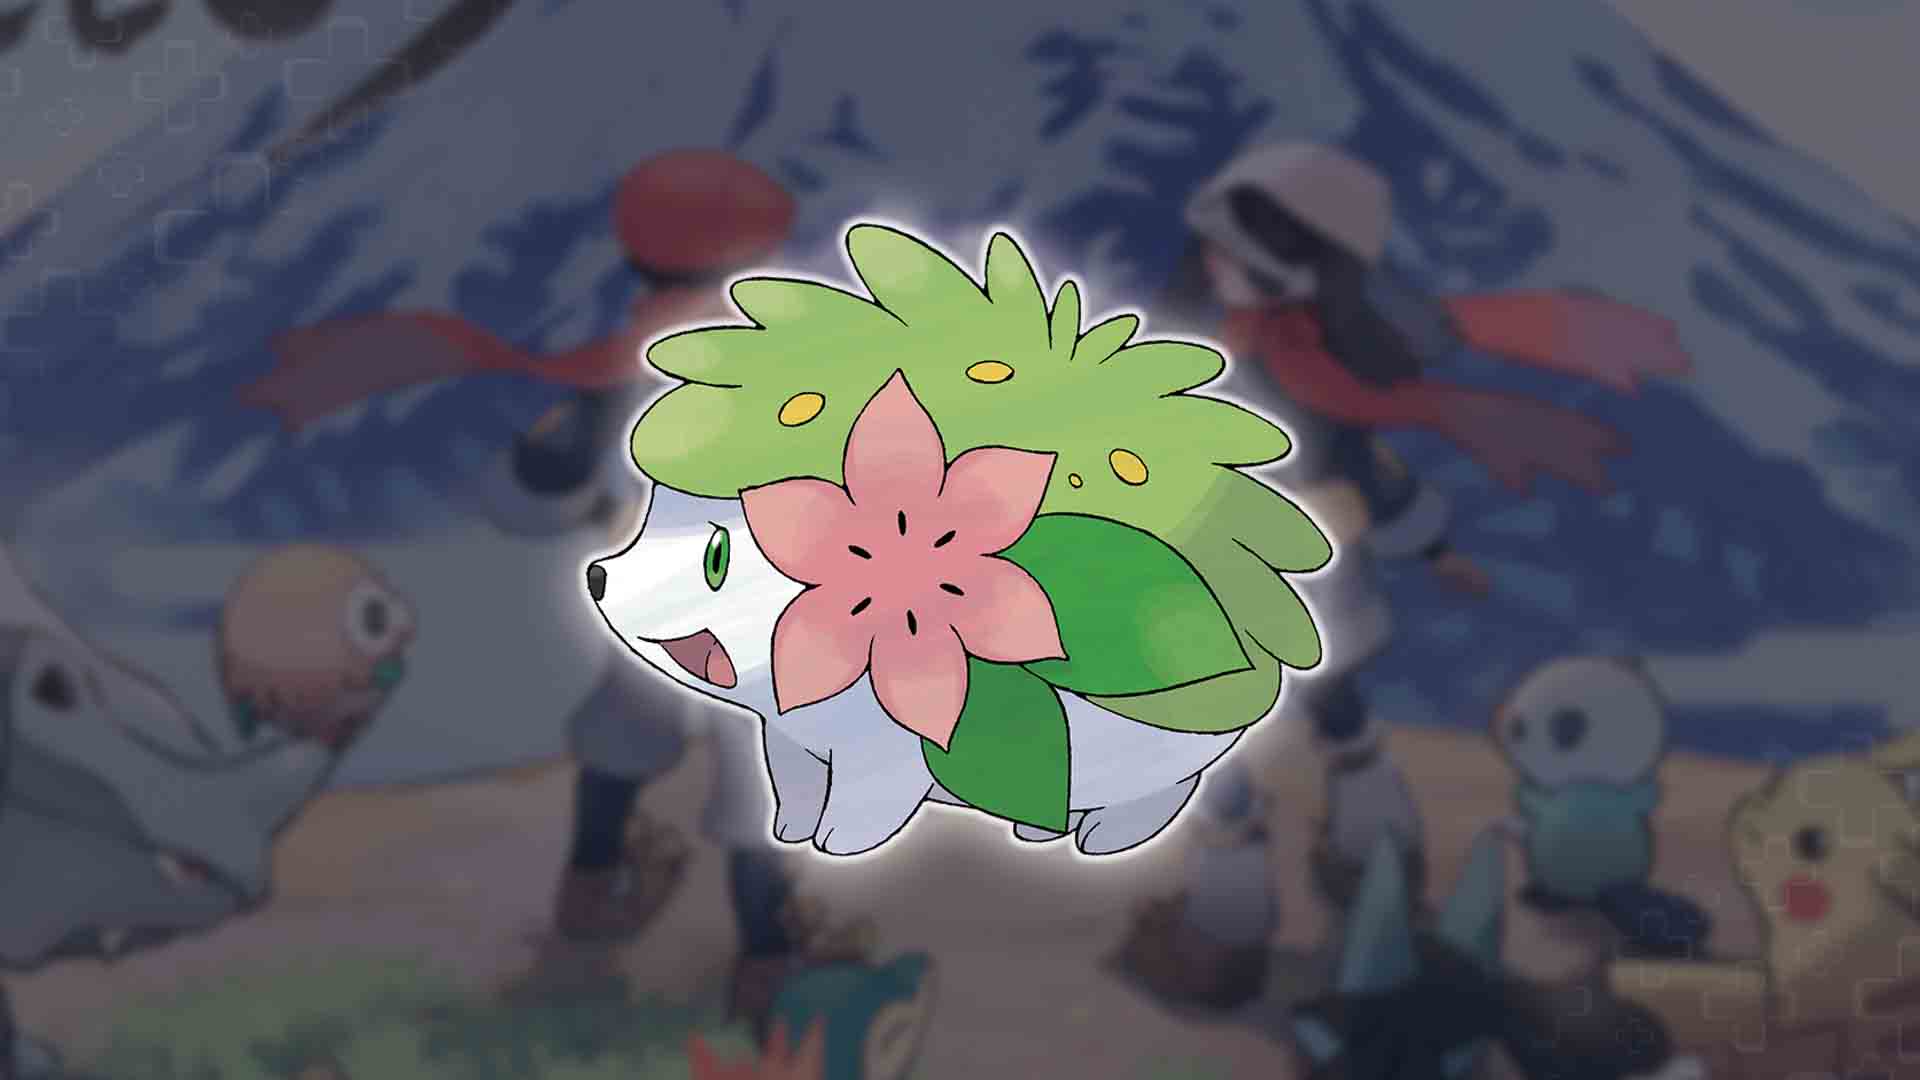 How to change Shaymin's forms in Pokémon Legends: Arceus